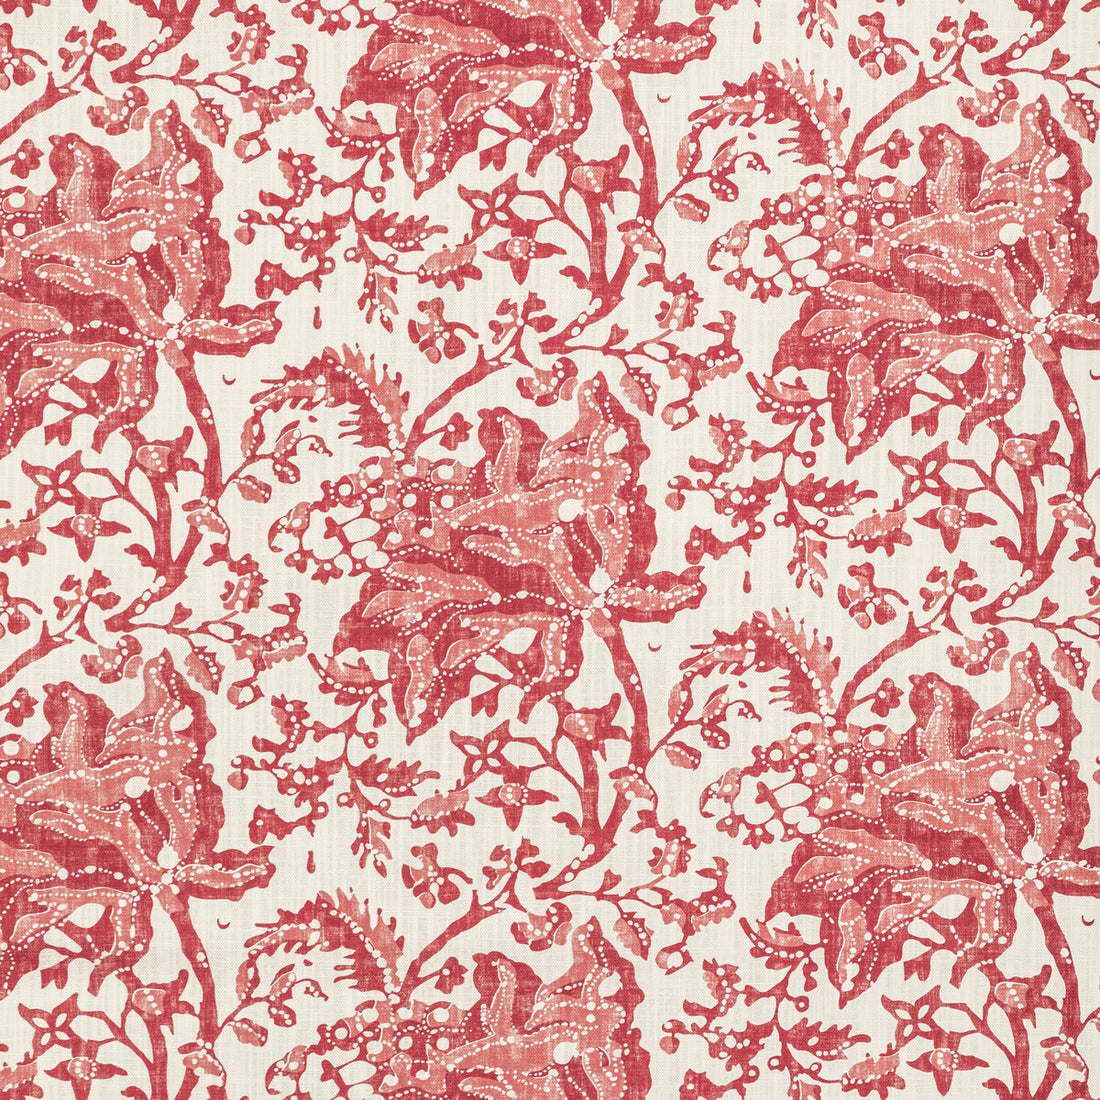 Weymouth Print fabric in red color - pattern 8022102.19.0 - by Brunschwig &amp; Fils in the Manoir collection